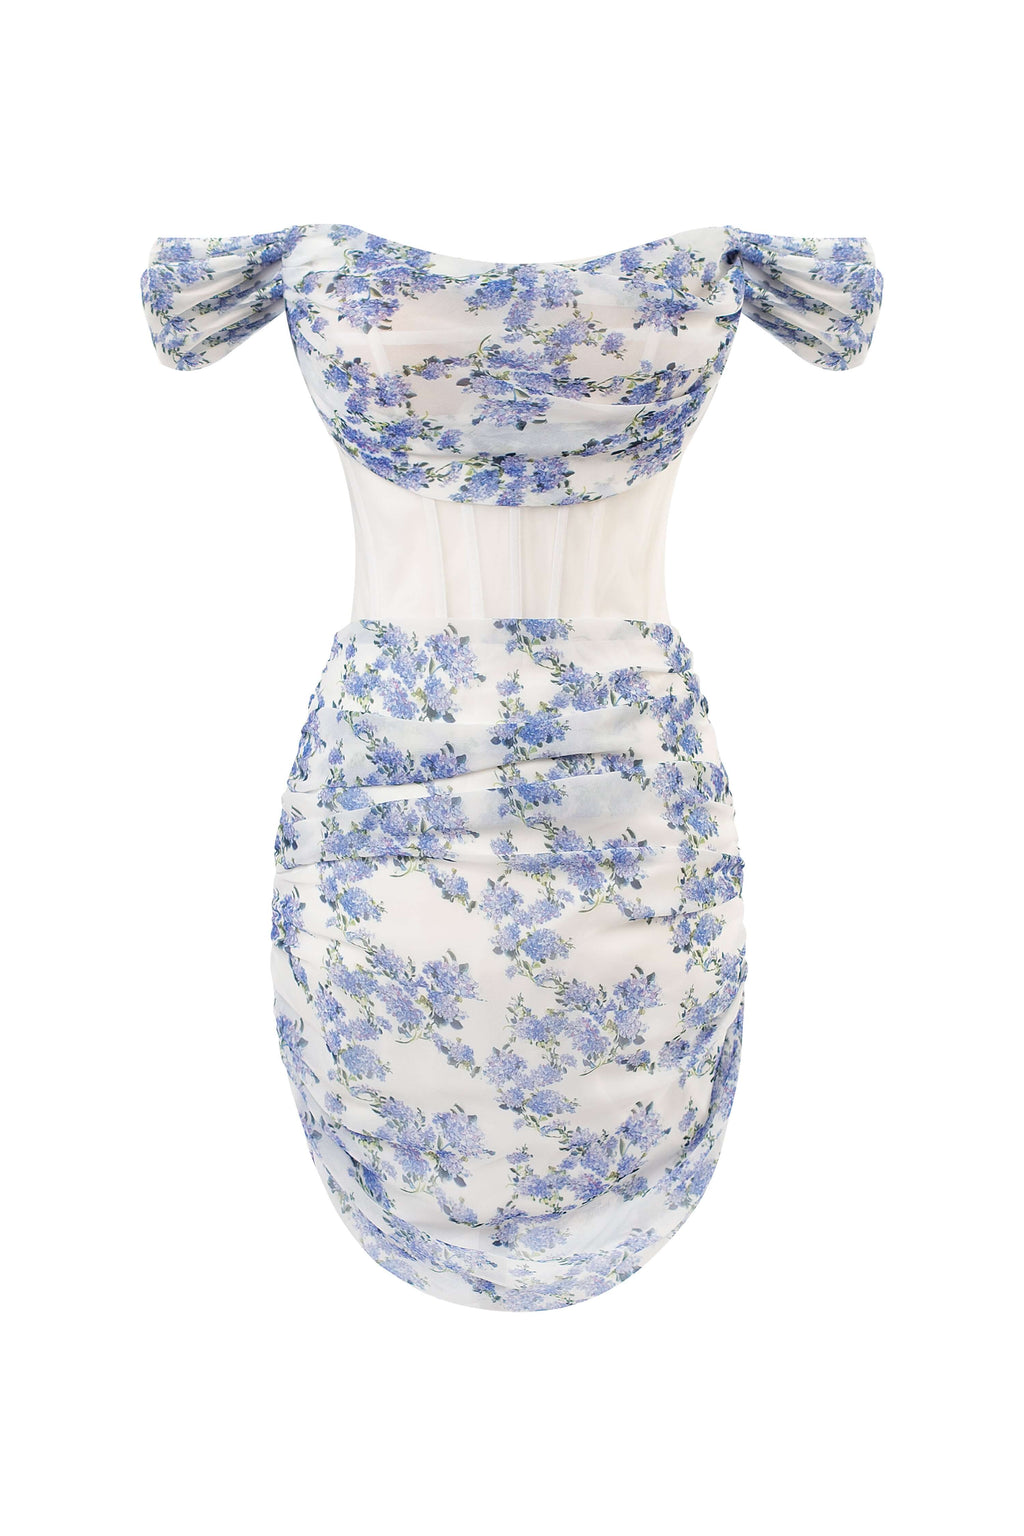 Cute off-the-shoulder floral dress with sheer built-in corset - Milla